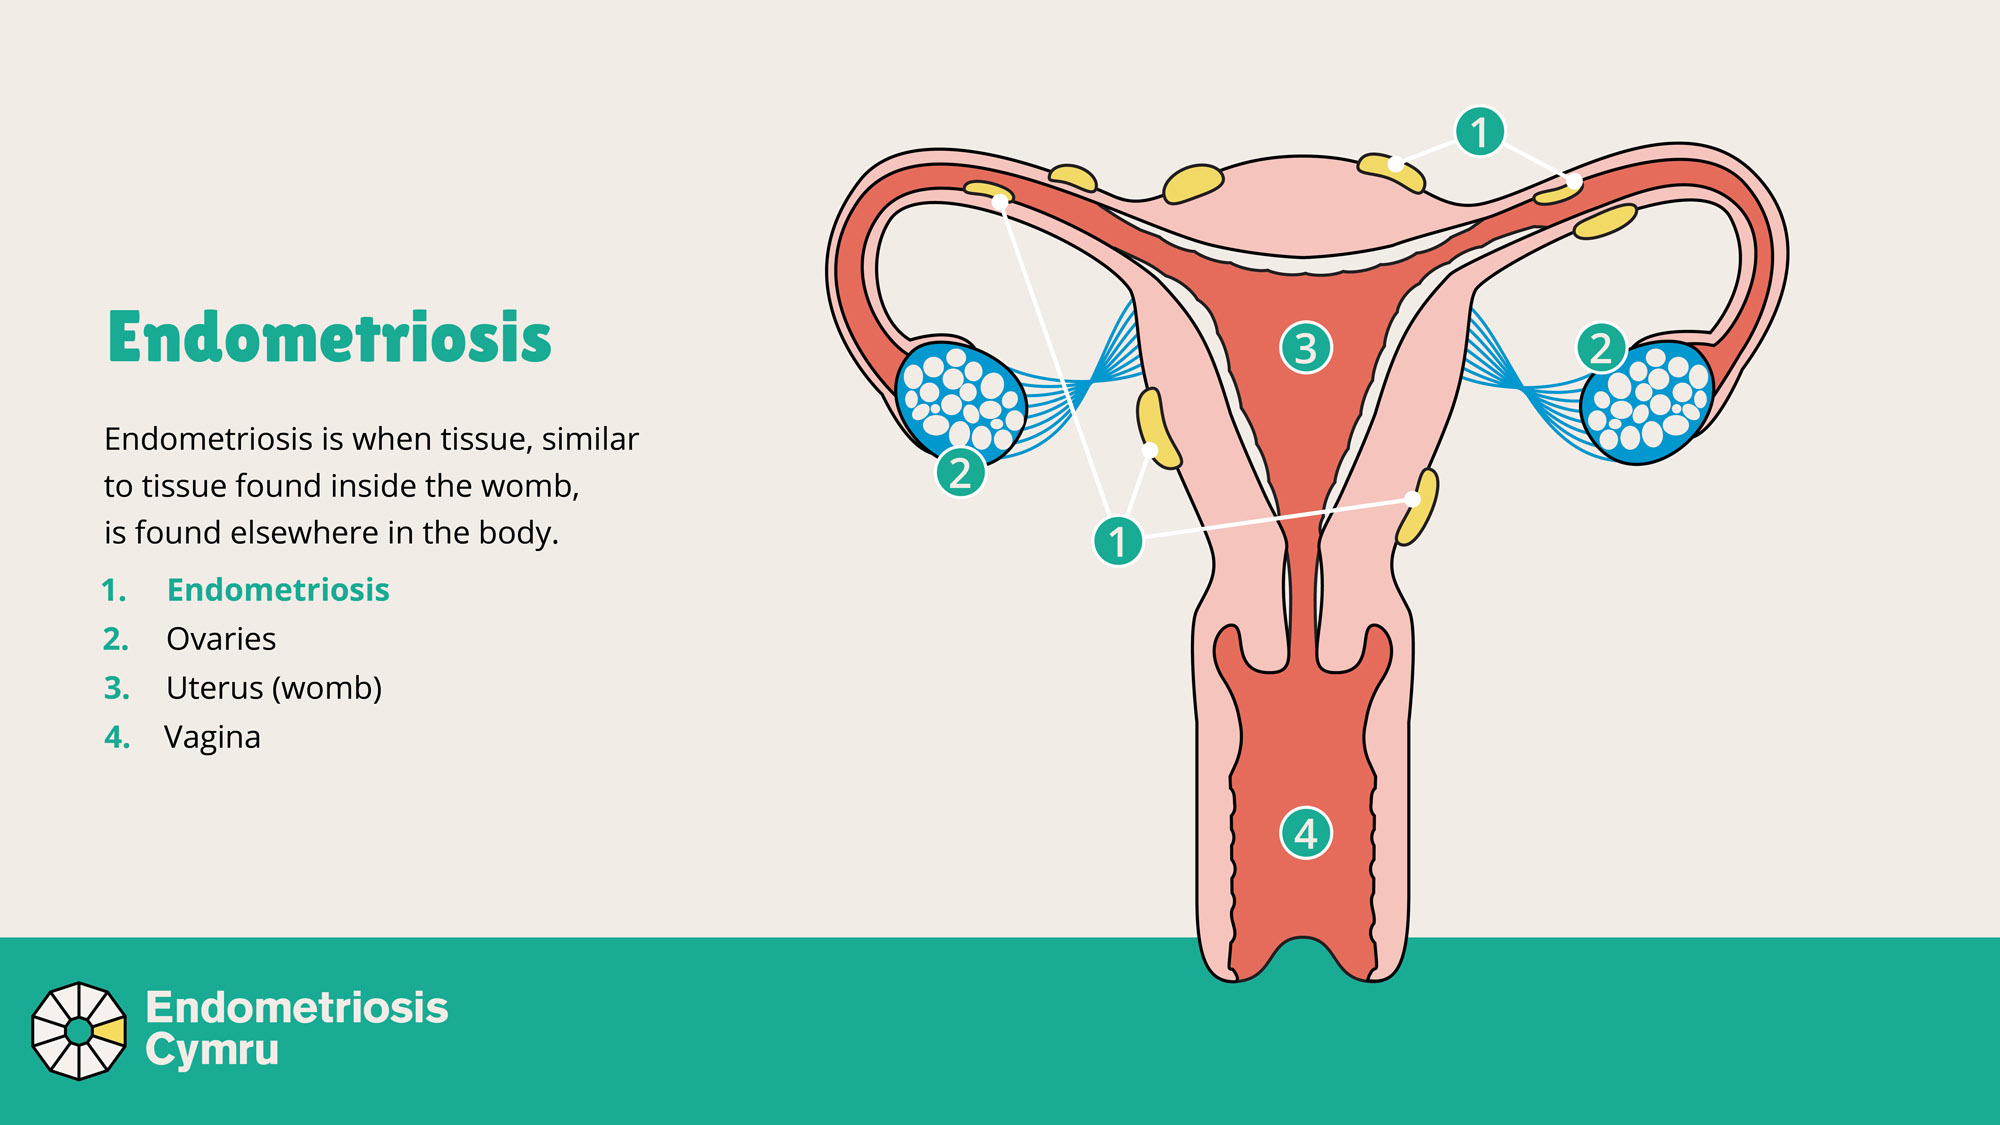 A diagram of the female reproductive organs showing spots of endometriosis tissue outside of the womb